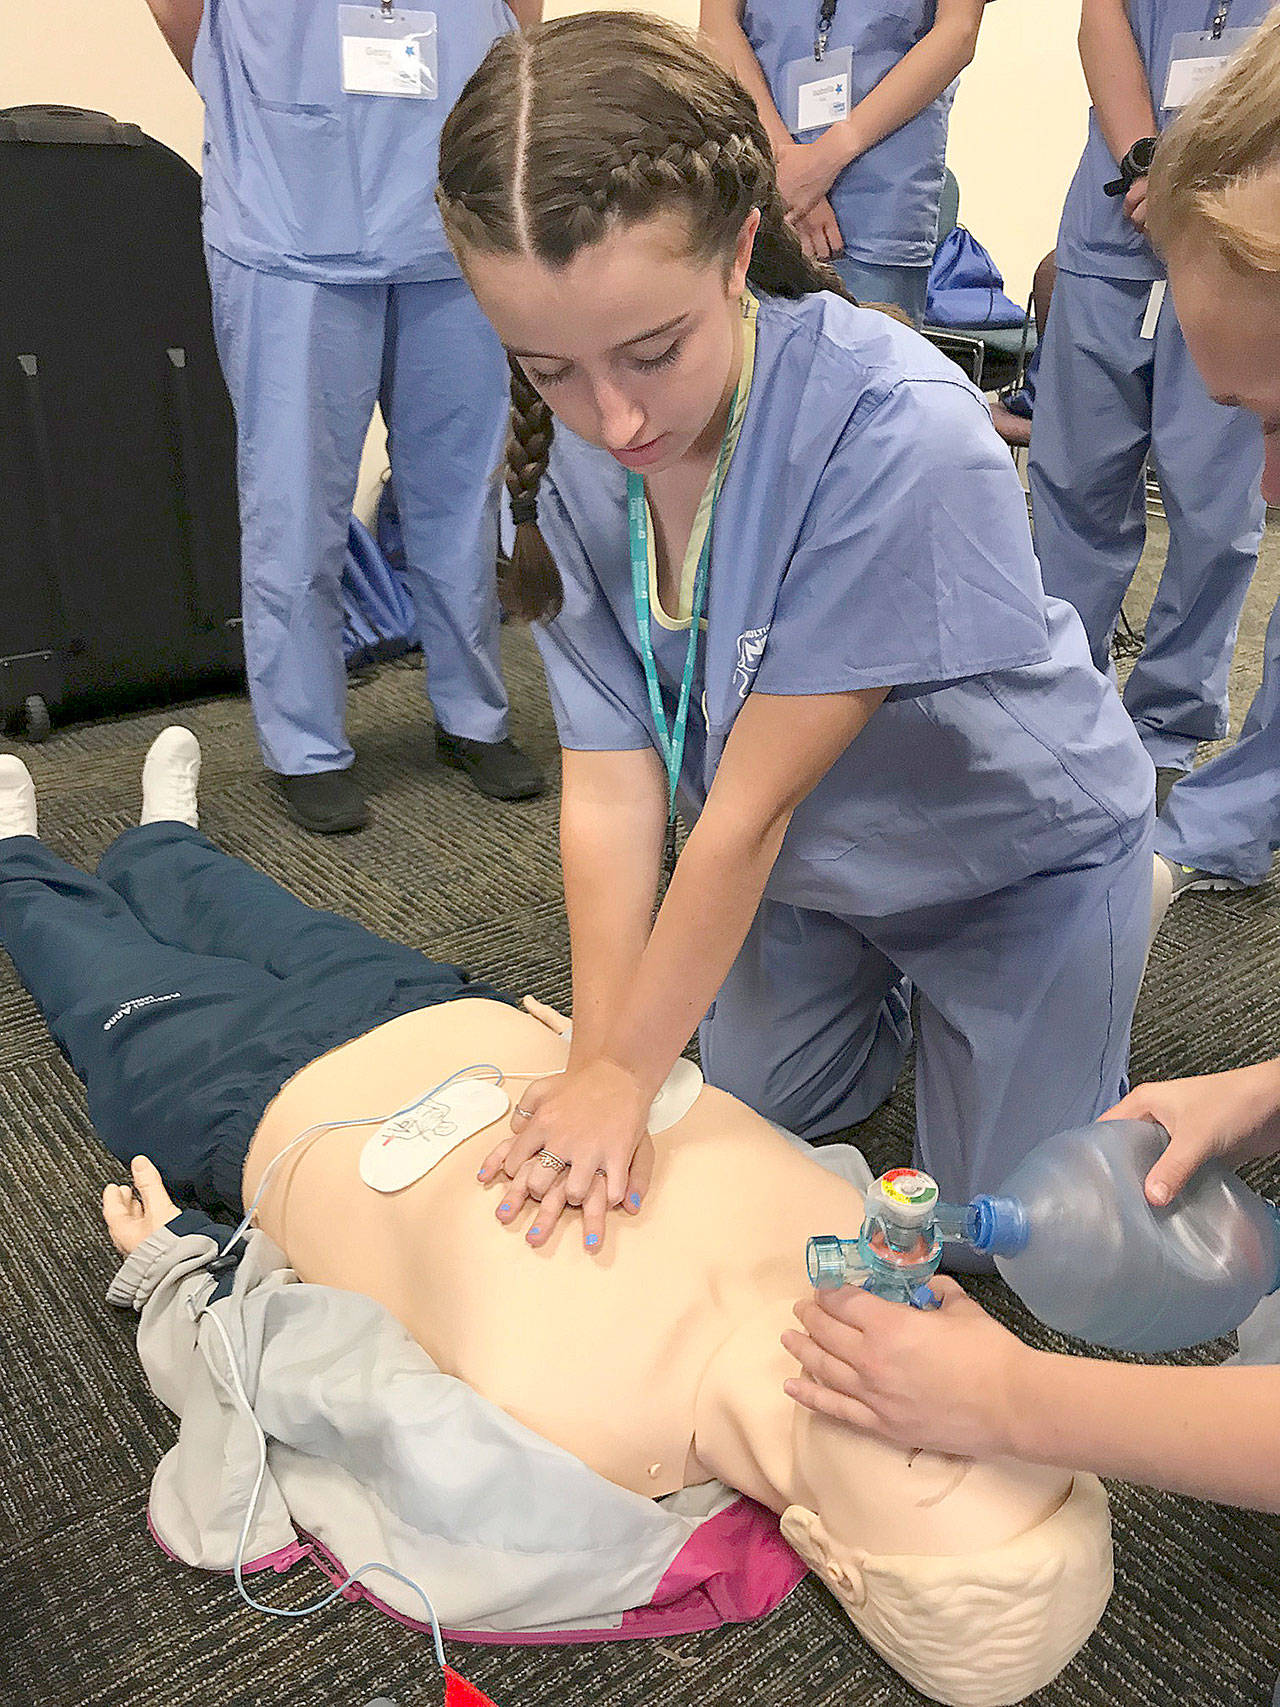 Alyssa Price, a junior-to-be at Kentlake High School, works on reviving a CPR manikin patient during Nurse Camp at Tacoma General Hospital last week. MARK KLAAS, Reporter